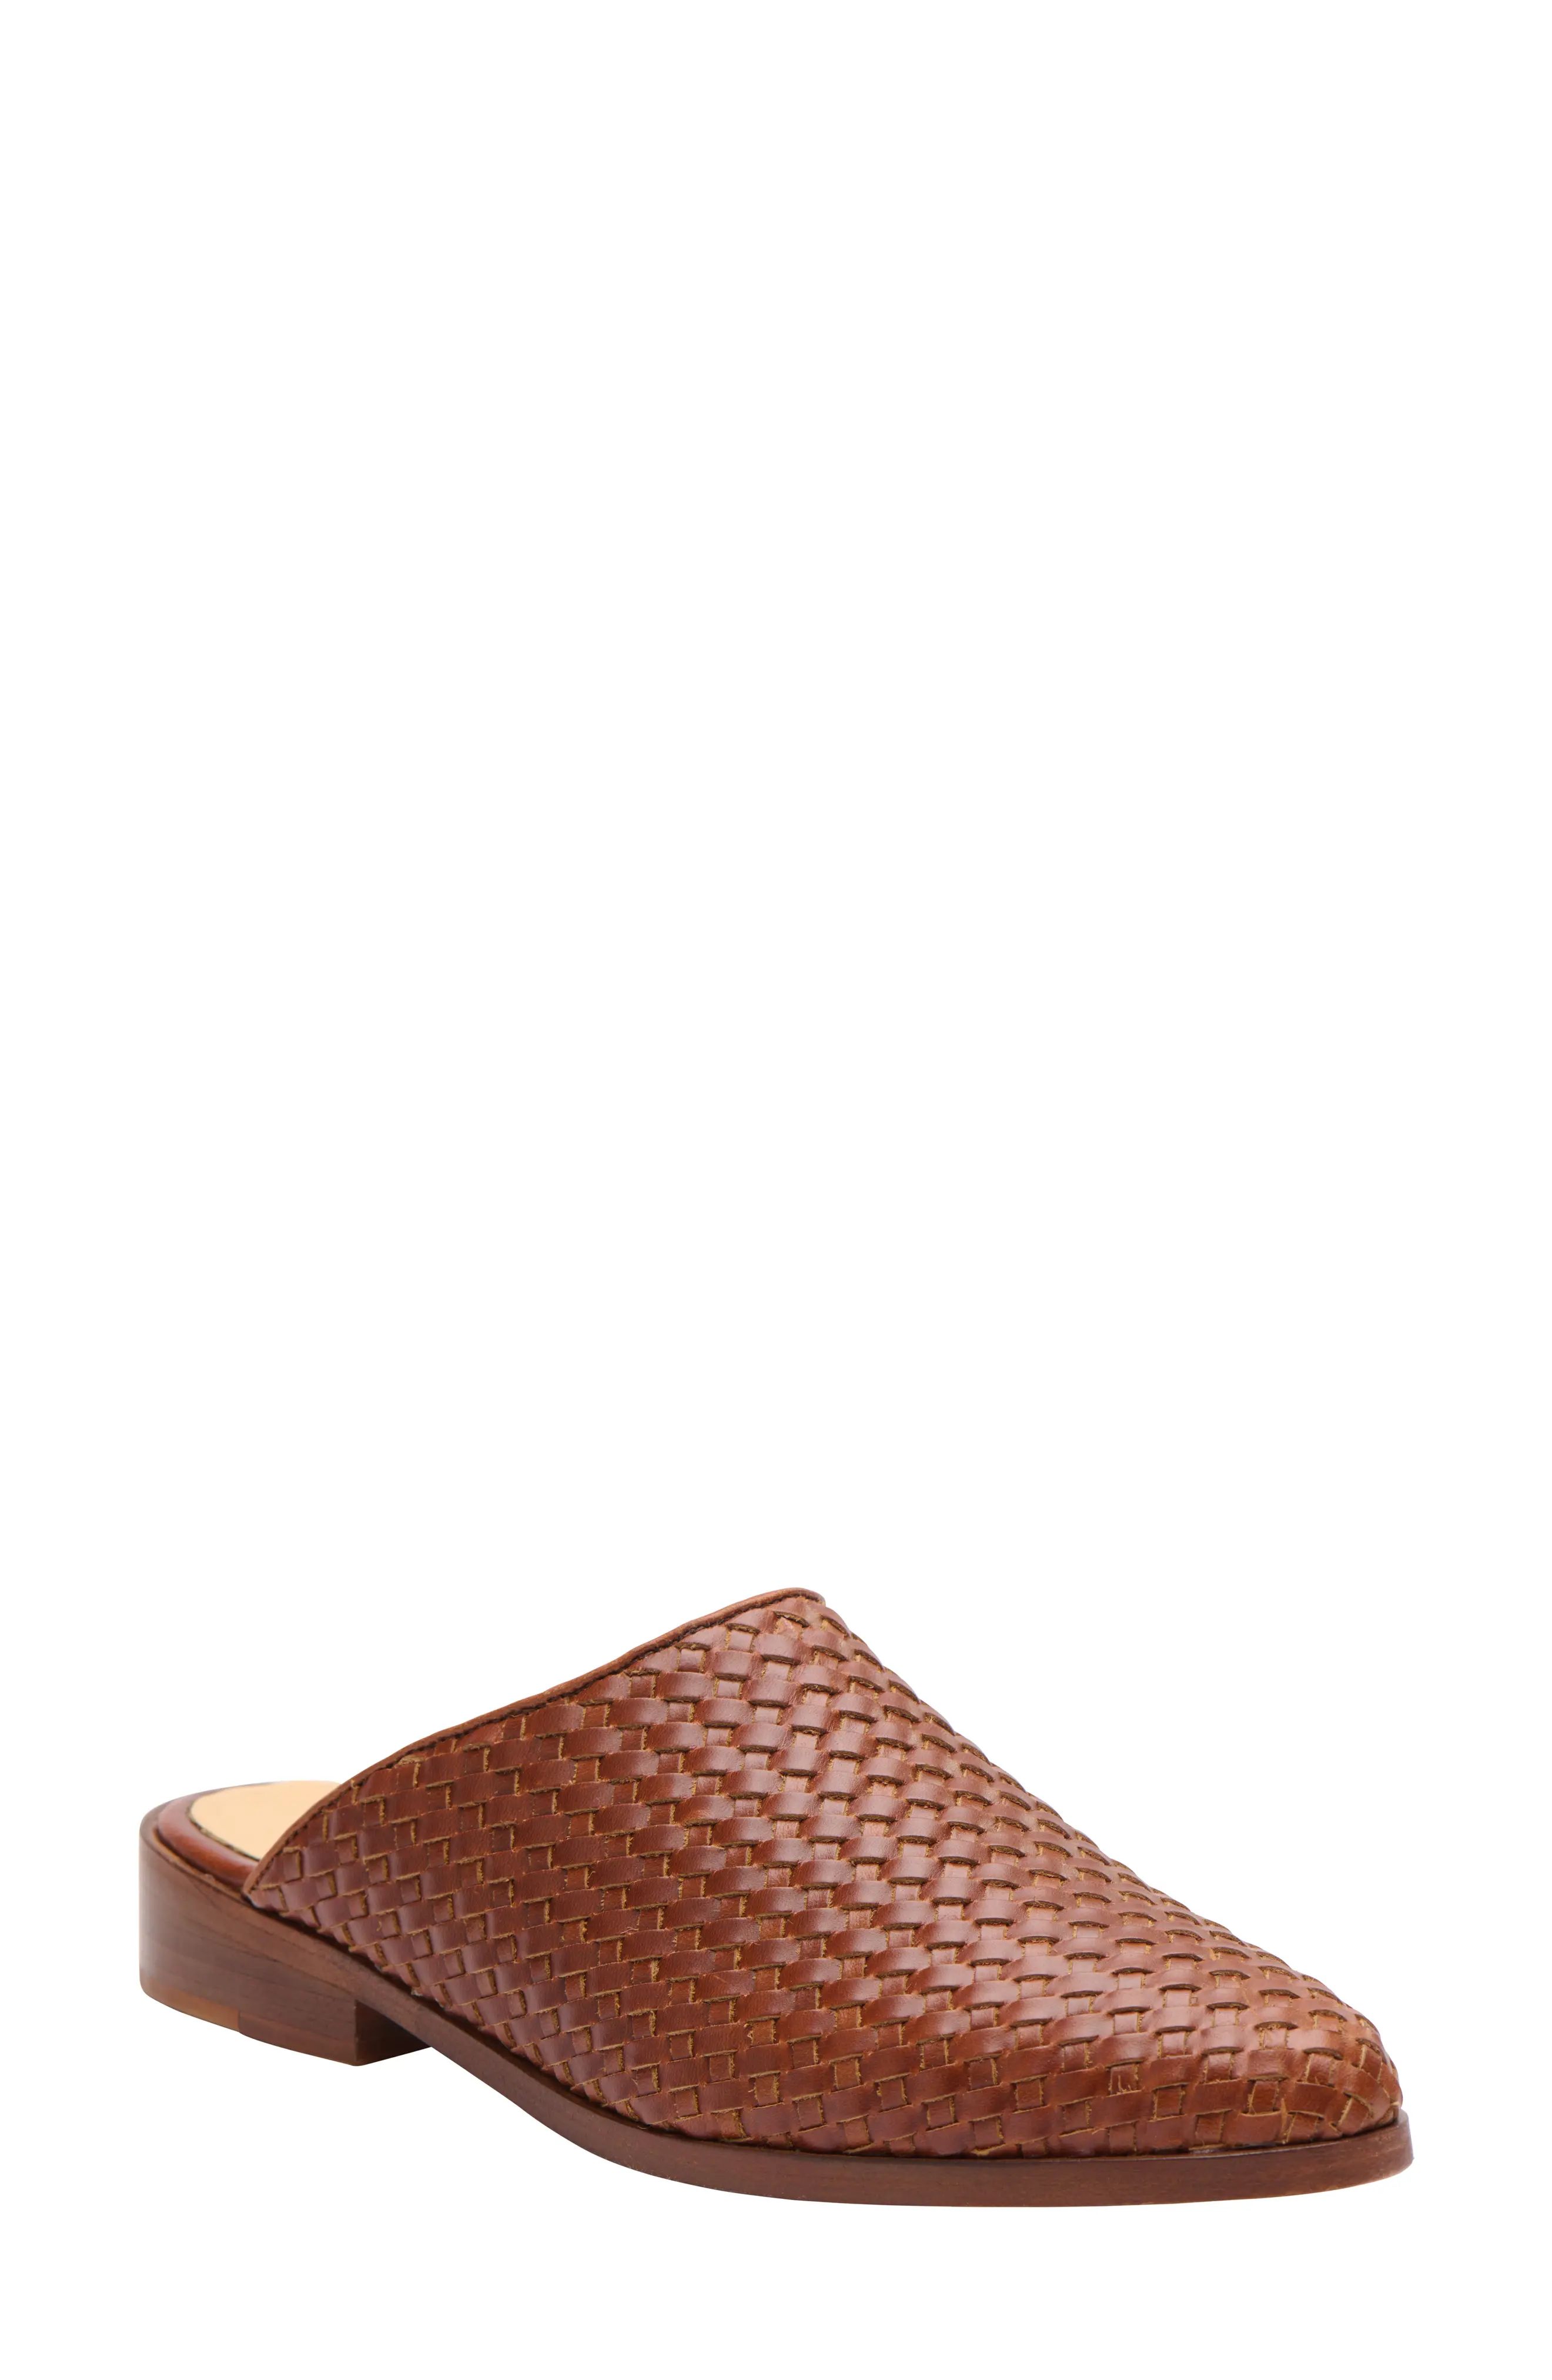 Nisolo Ama Water Resistant Woven Mule, Size 10 in Brandy at Nordstrom | Nordstrom